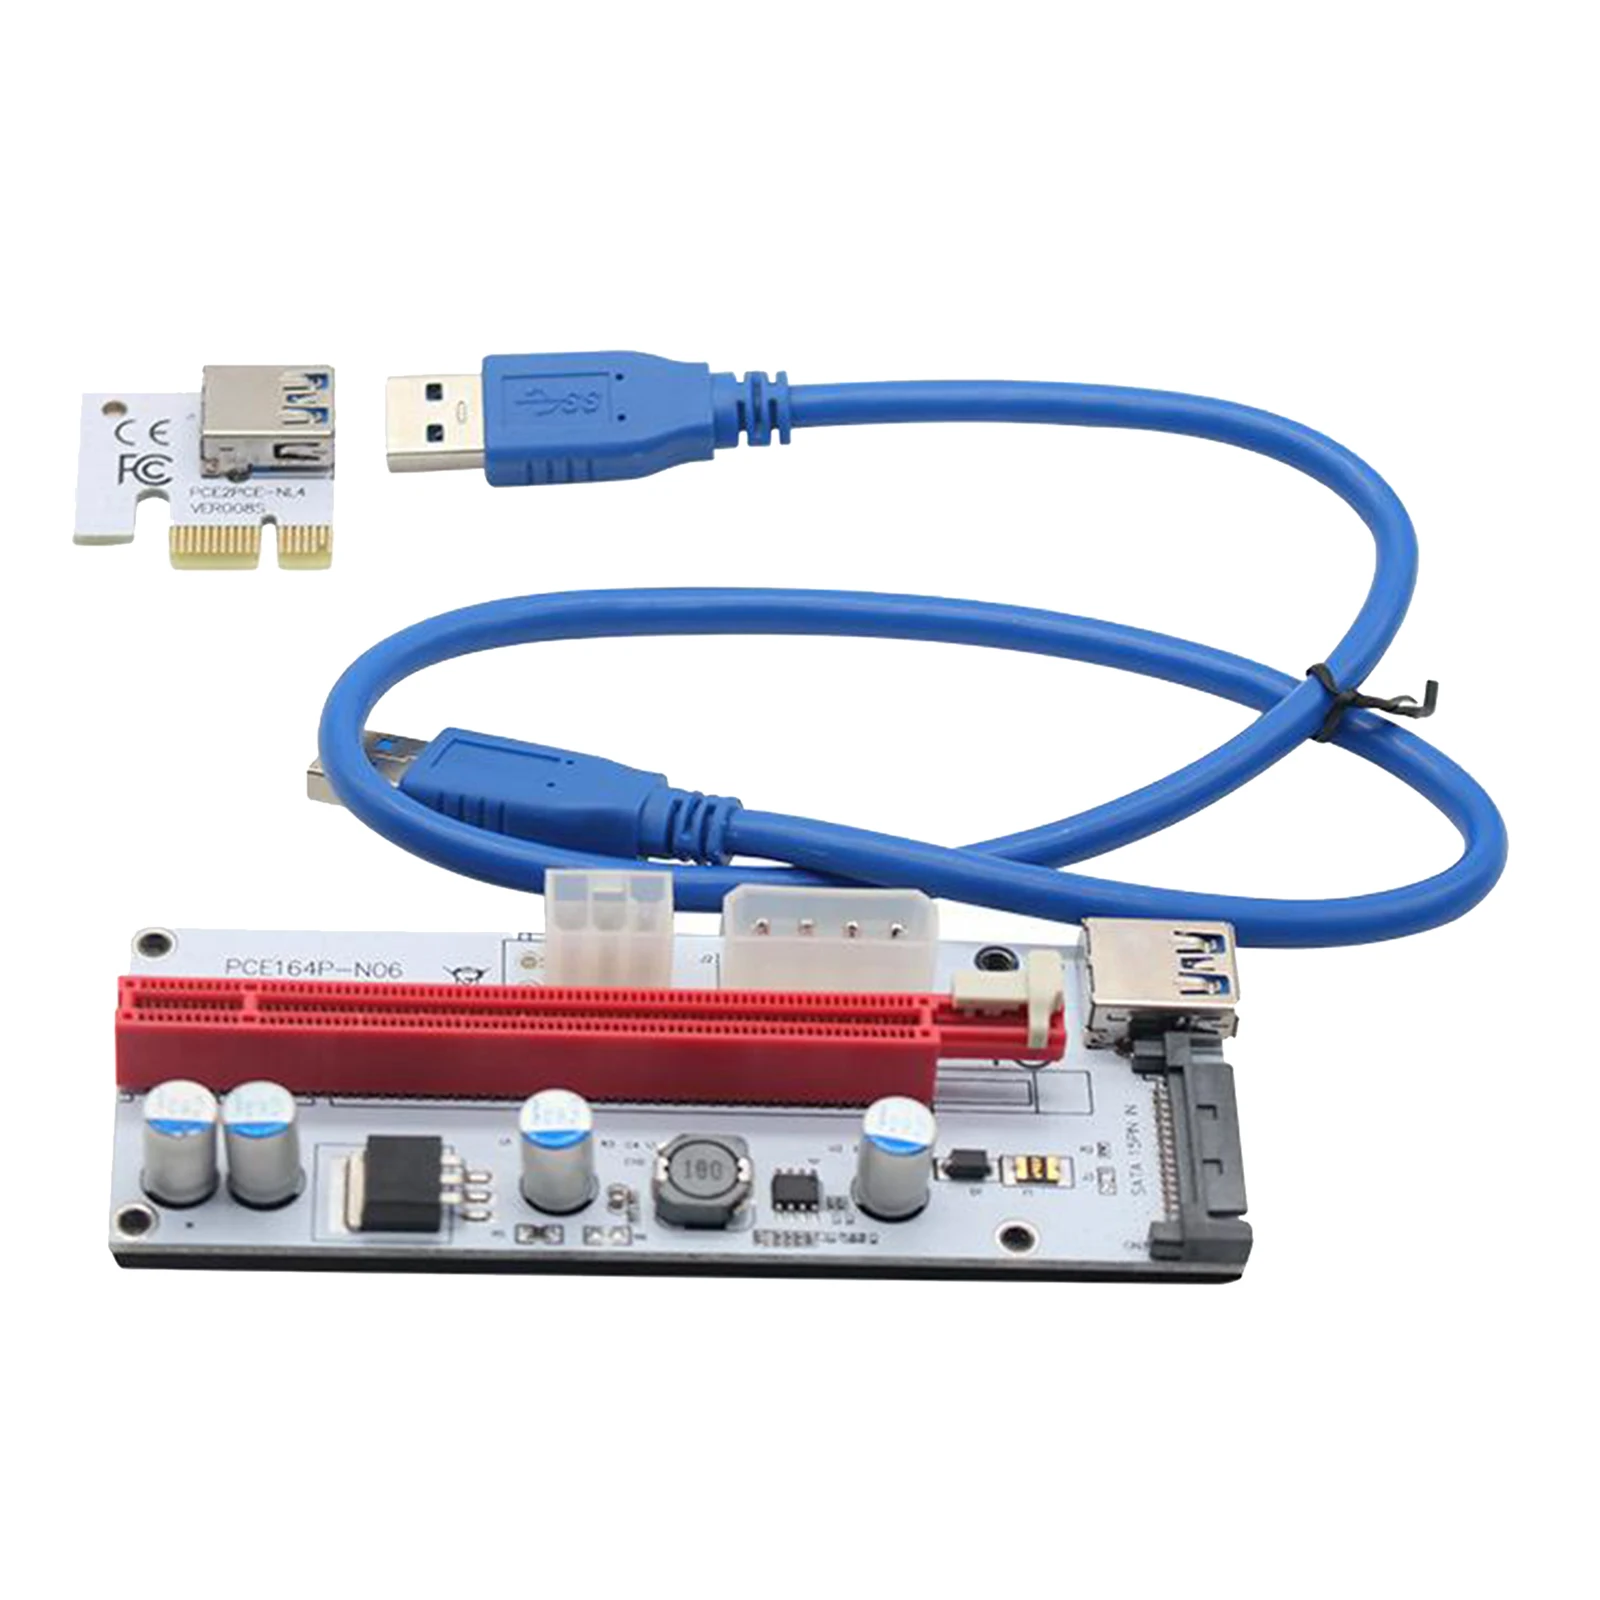 PCI-E Riser Card 008s 1x to 16x Graphic Extension Adapter Card Extender, Stable and Safe